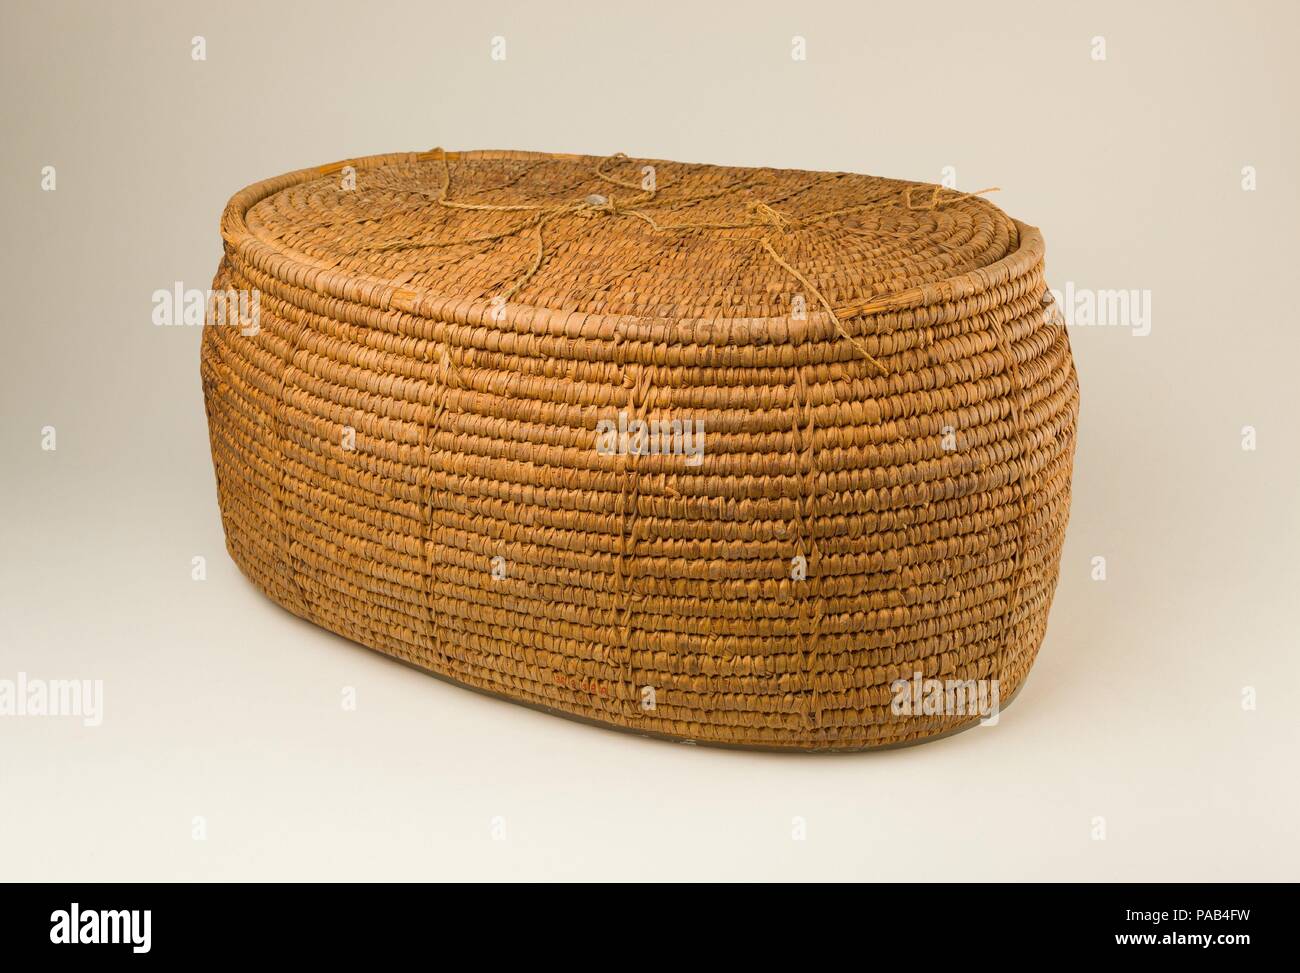 Large Oval Storage Basket. Dimensions: Basket: L. 55 cm (21 5/8 in.); W. 40 cm (15 3/4 in.)  Lid: L. 46.5 cm (18 5/16 in.); w. 33 cm (13 in.)  Overall: H. 24.5 cm (9 5/8 in.). Dynasty: Dynasty 18, early. Reign: reign of Thutmose II-Early Joint reign. Date: ca. 1492-1473 B.C..  This storage basket was discovered in the tomb of Senenmut's mother, Hatnofer (36.3.1), who lived into the reign of Hatshepsut.  The basket is made of halfa grass coils sewn together with strips of palm leaf.  It was tied shut using pieces of linen cords attached around the top edge of the basket. Then a mud seal was pre Stock Photo